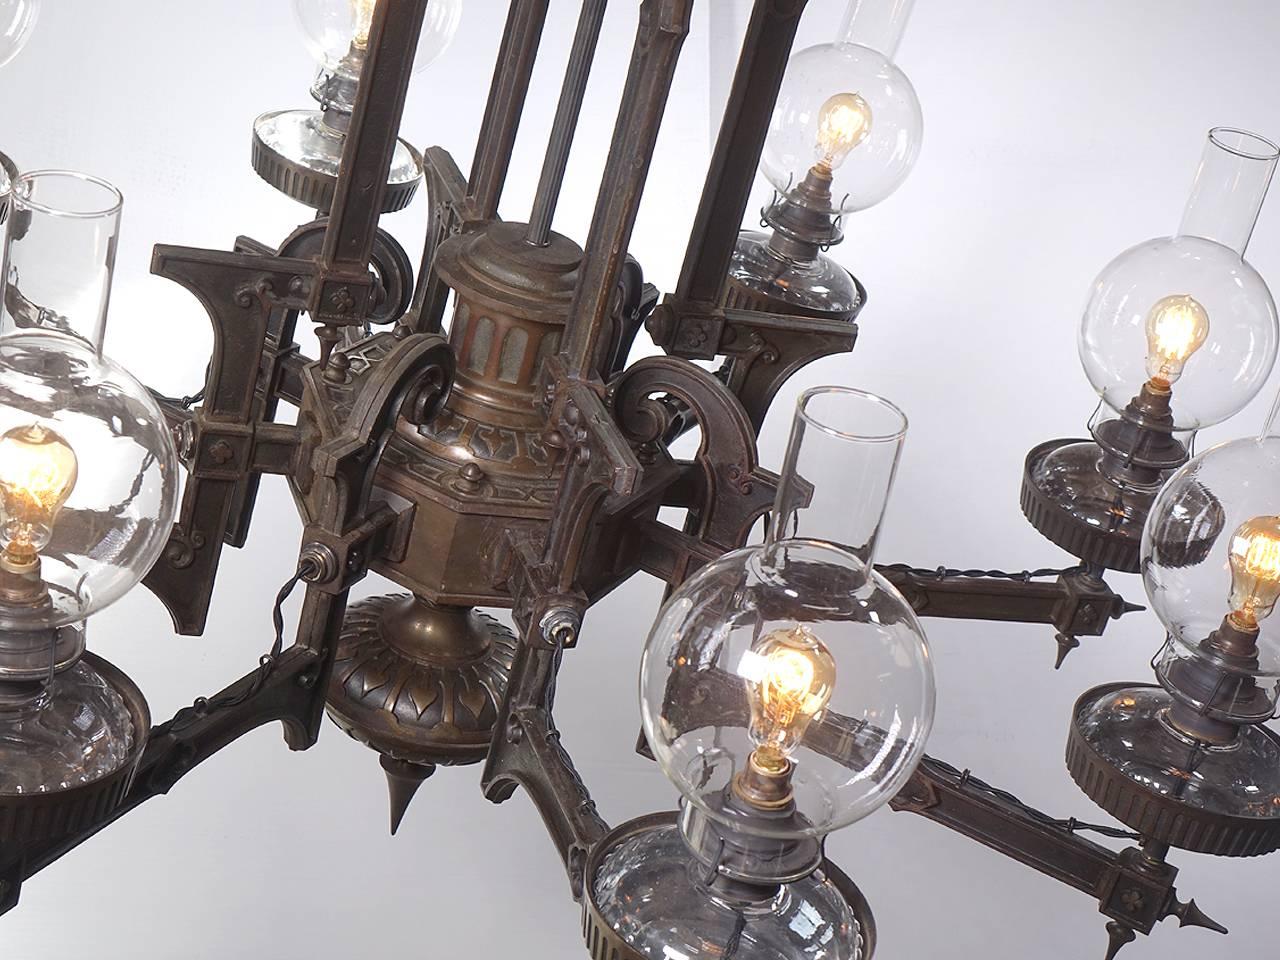 Not many of these large and impressive oil chandeliers were made and few survive today. Lamps like this are often unsigned but are attributed to companies like Tucker or Bradley and Hubbard. Our best guess is 1870 by Tucker. A lamp like this was